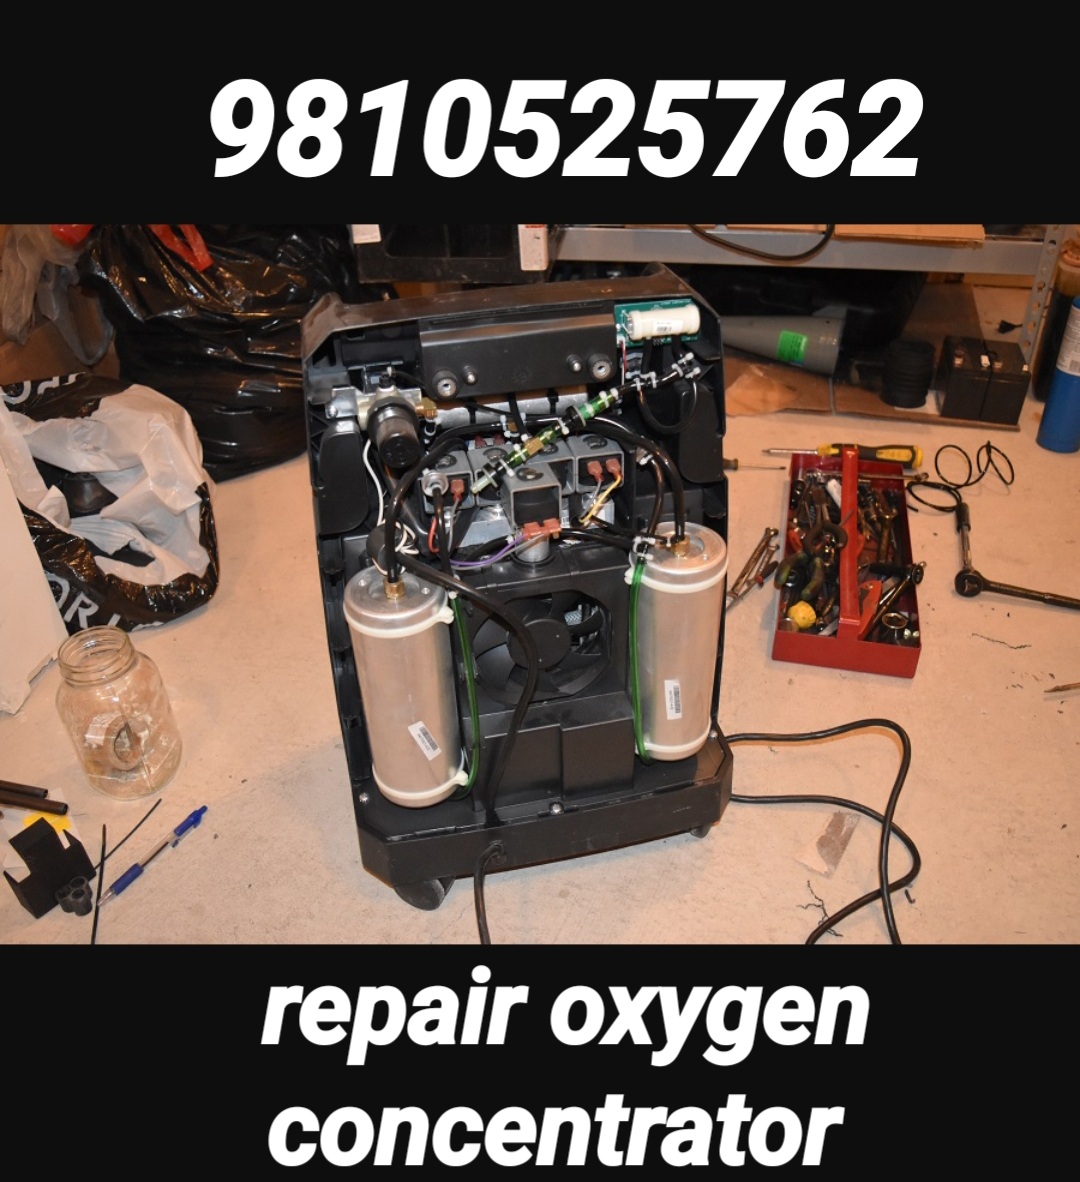 oxygen concentrator repair centre in dilshad garden 9810525762